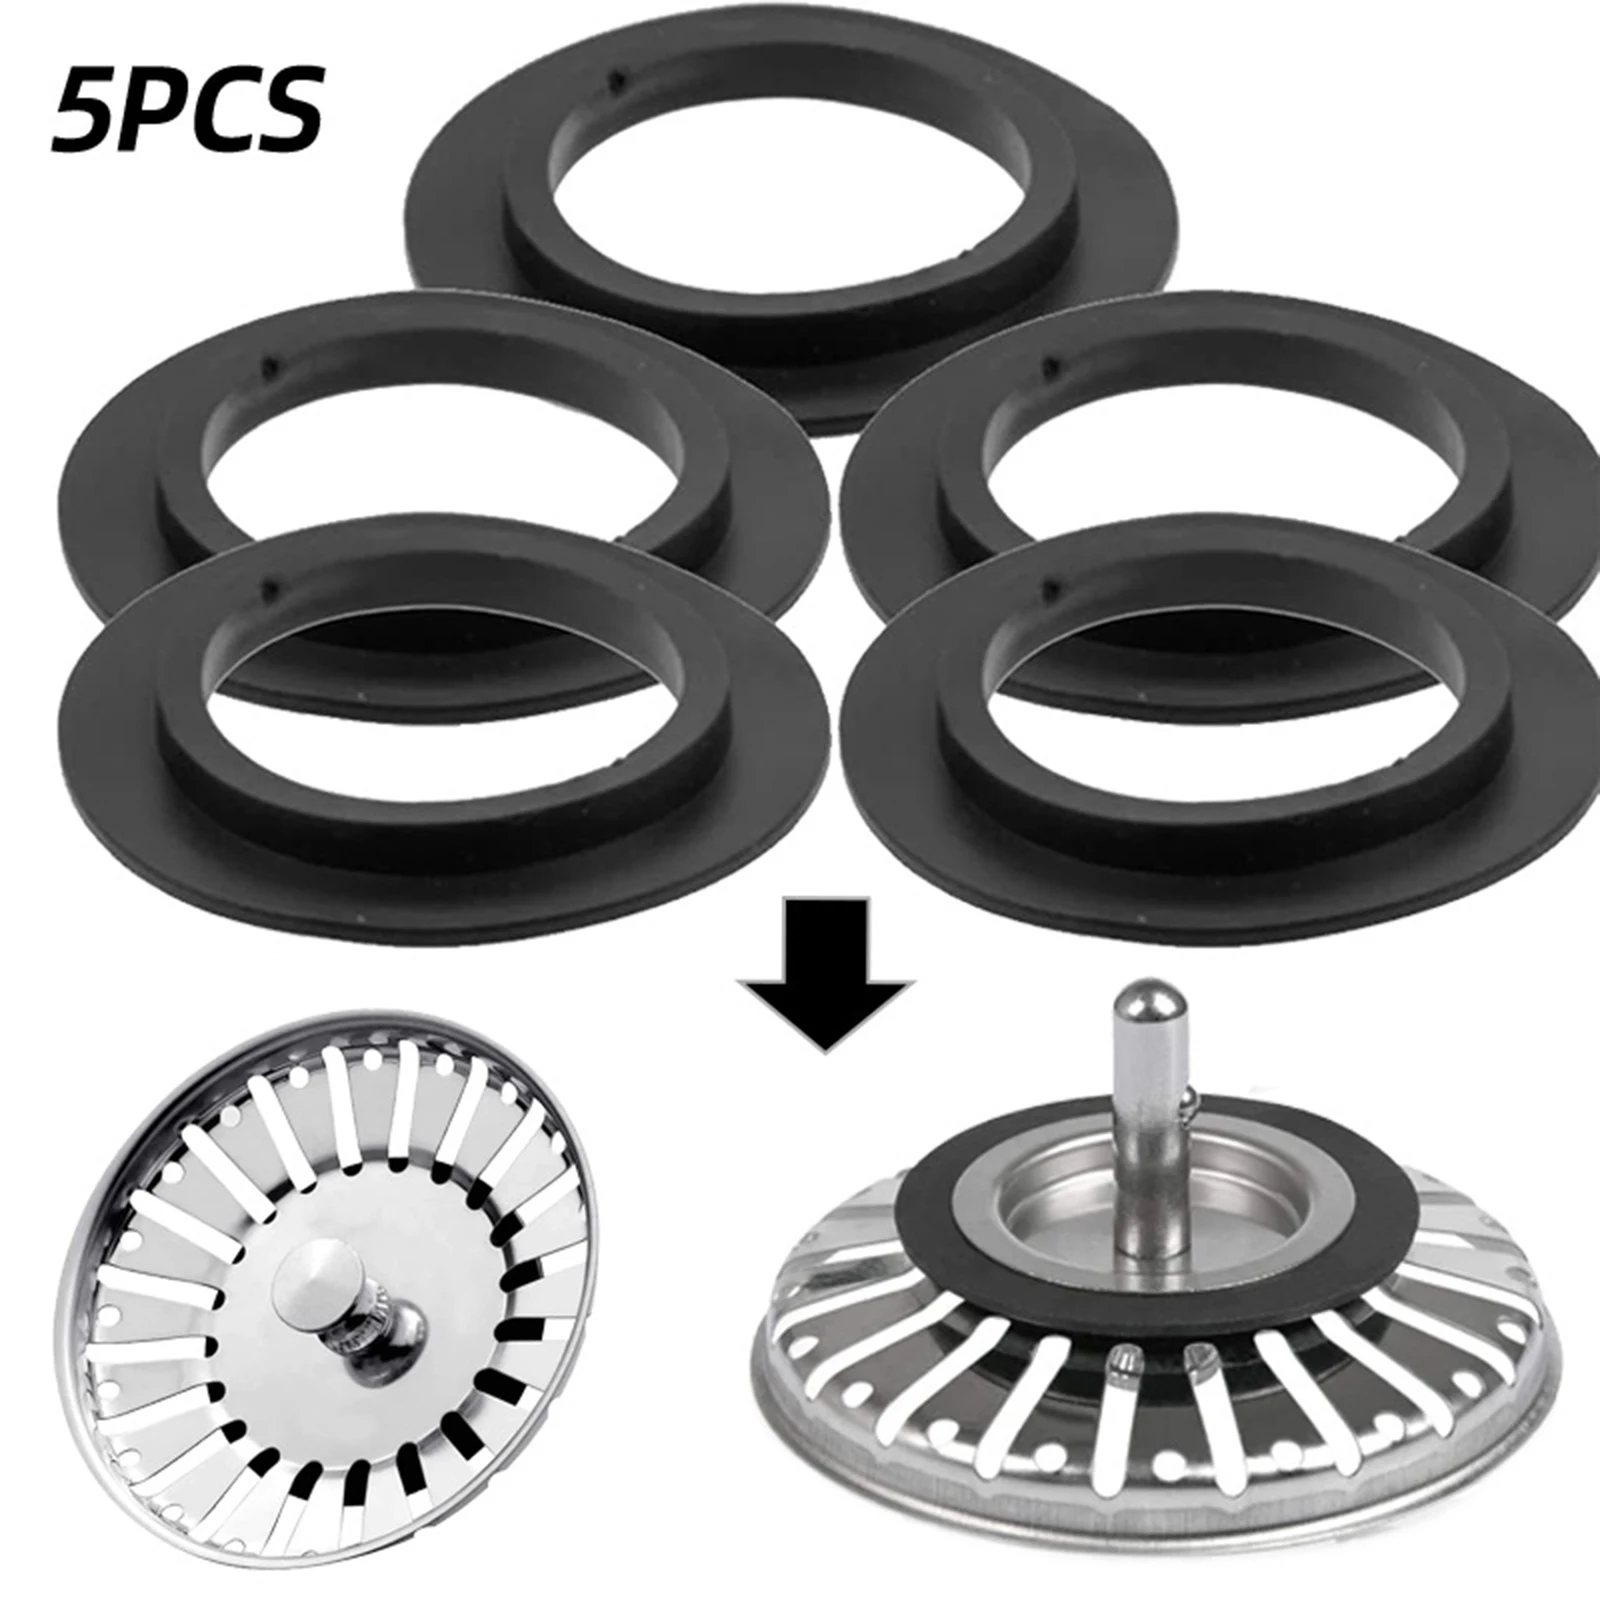 5Pcs Rubber Waterproof Gasket Strainer Seals Durable O-ring Washer Gaskets Kitchen Sink Filter Replacement Accessories 5pcs sealing washer replacement gaskets ring for nozzle repair adapter gasket sealing o rings rubber set repair